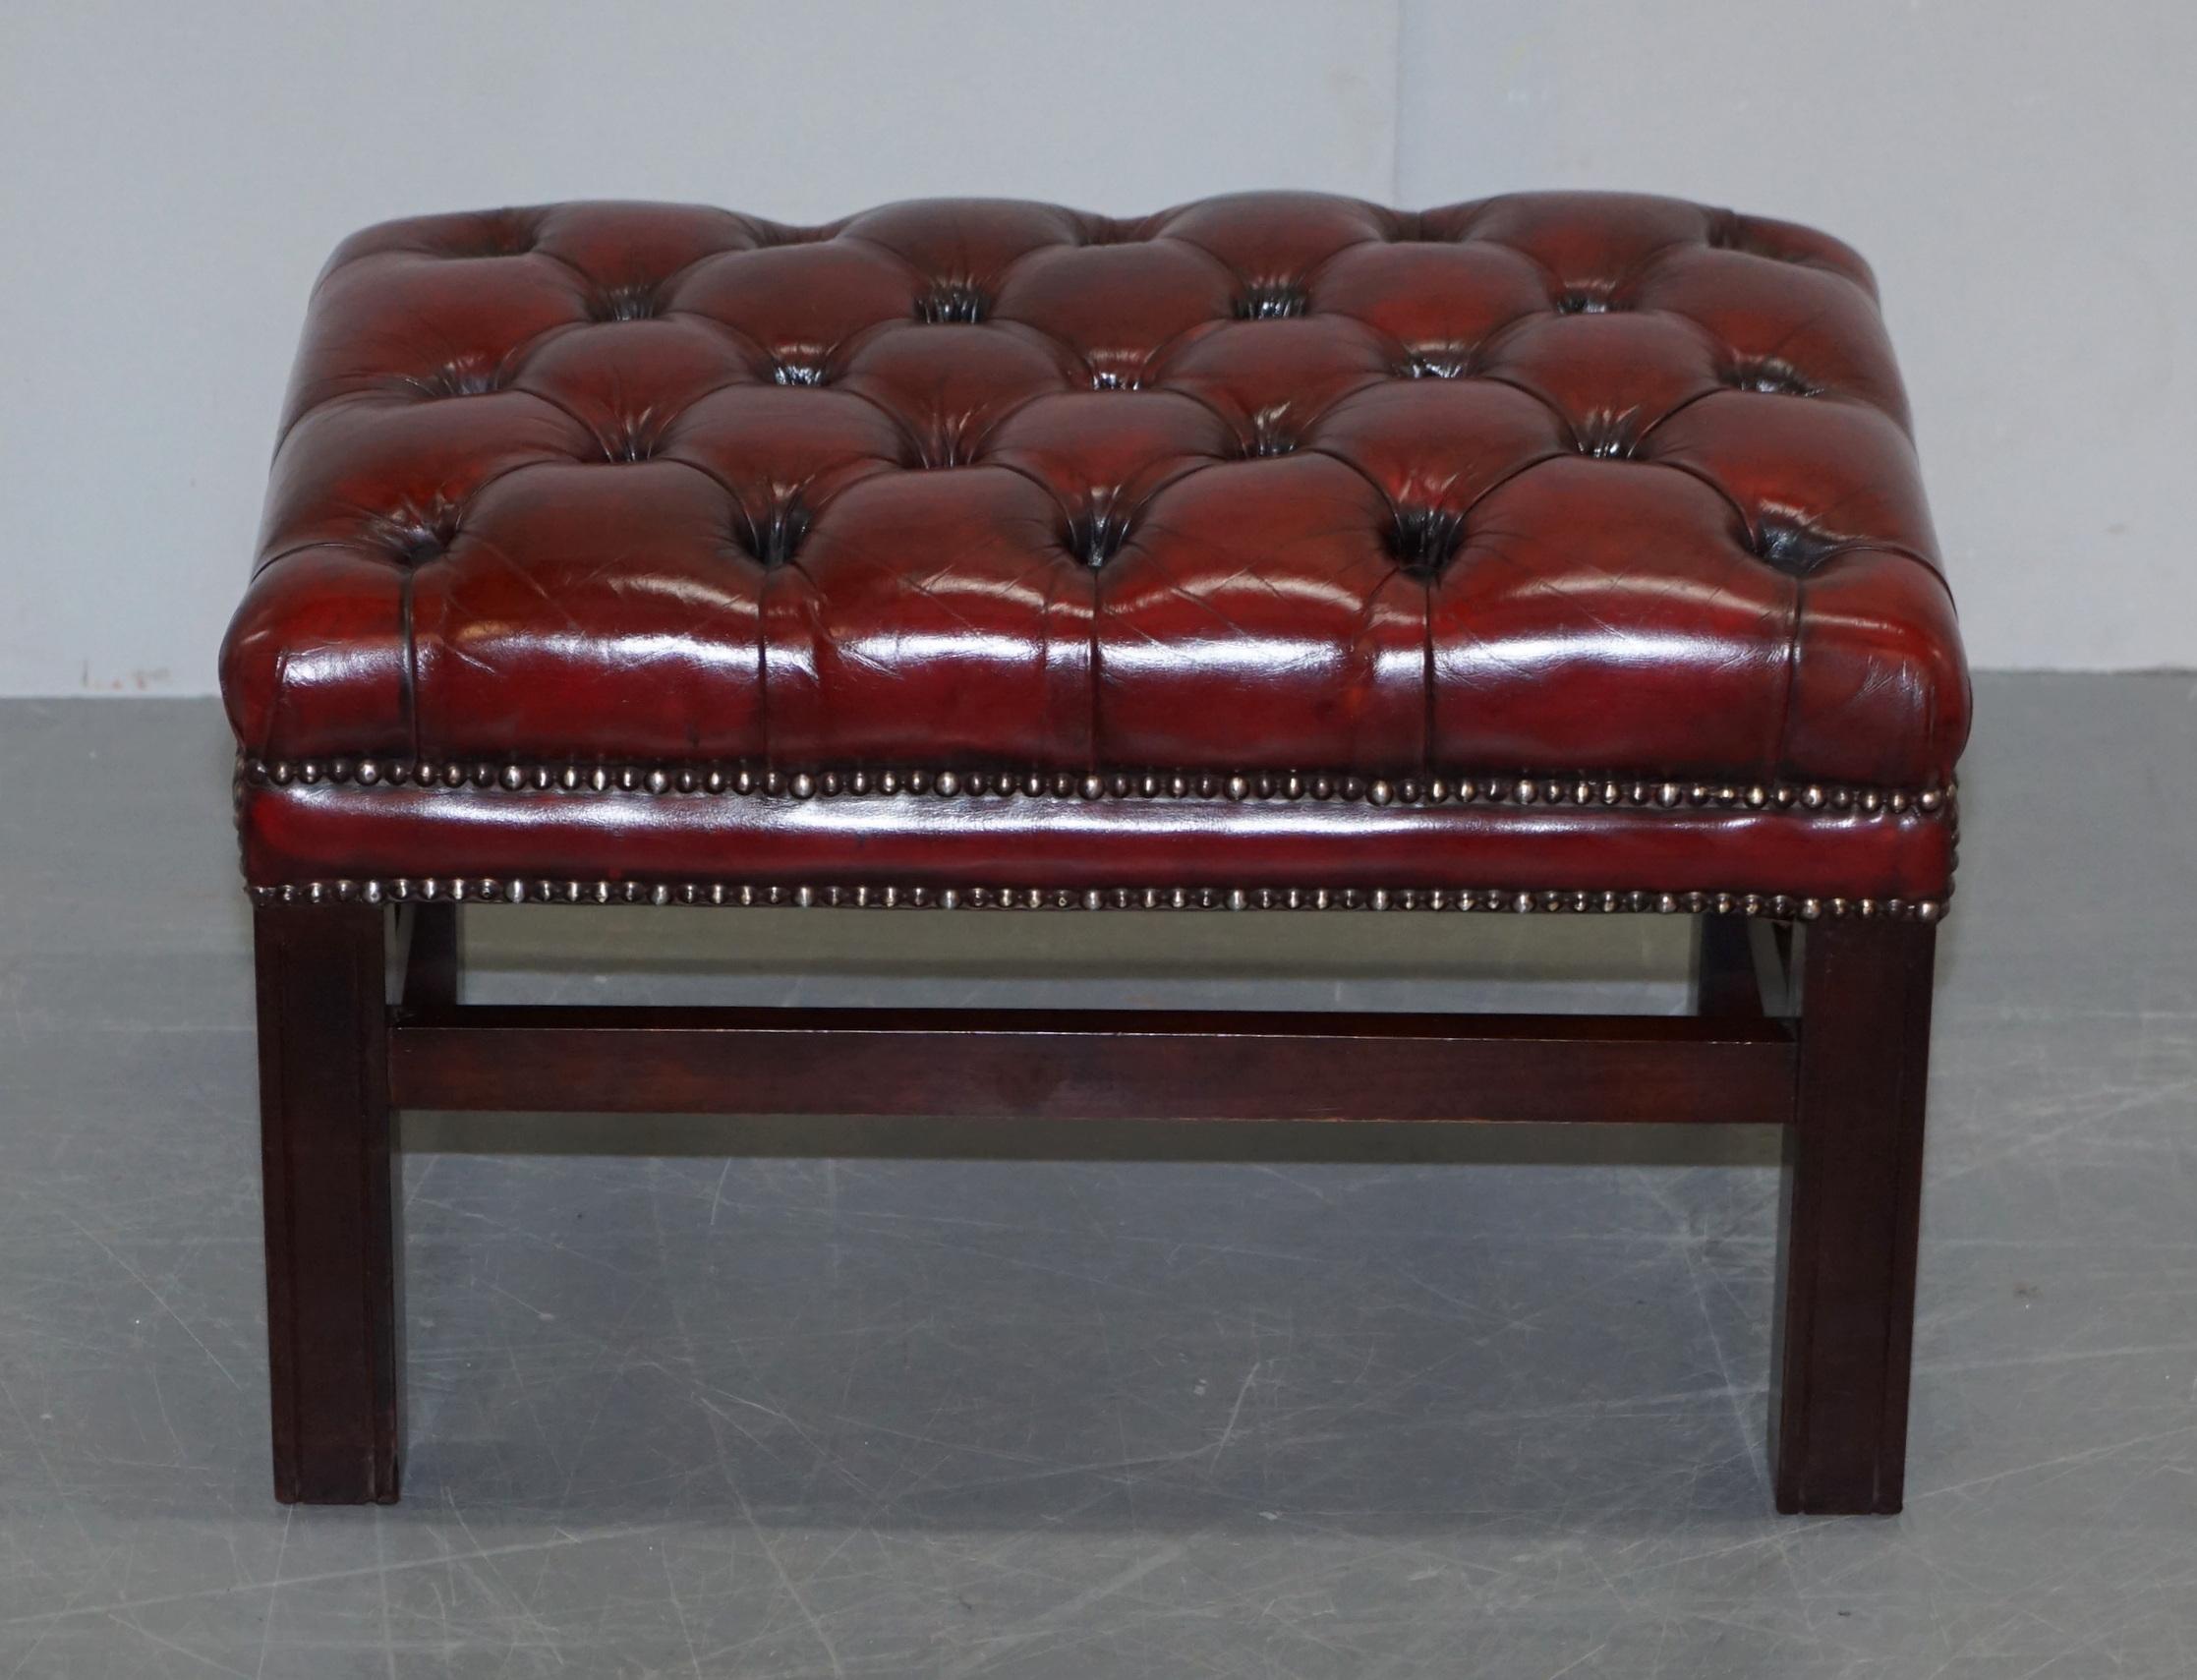 We are delighted to offer for sale this stunning fully restored hand dyed Cherry Bordeaux leather Chesterfield footstool

A very good looking and well made piece, it has been upholstered with high grade leather which has been hand dyed this nice